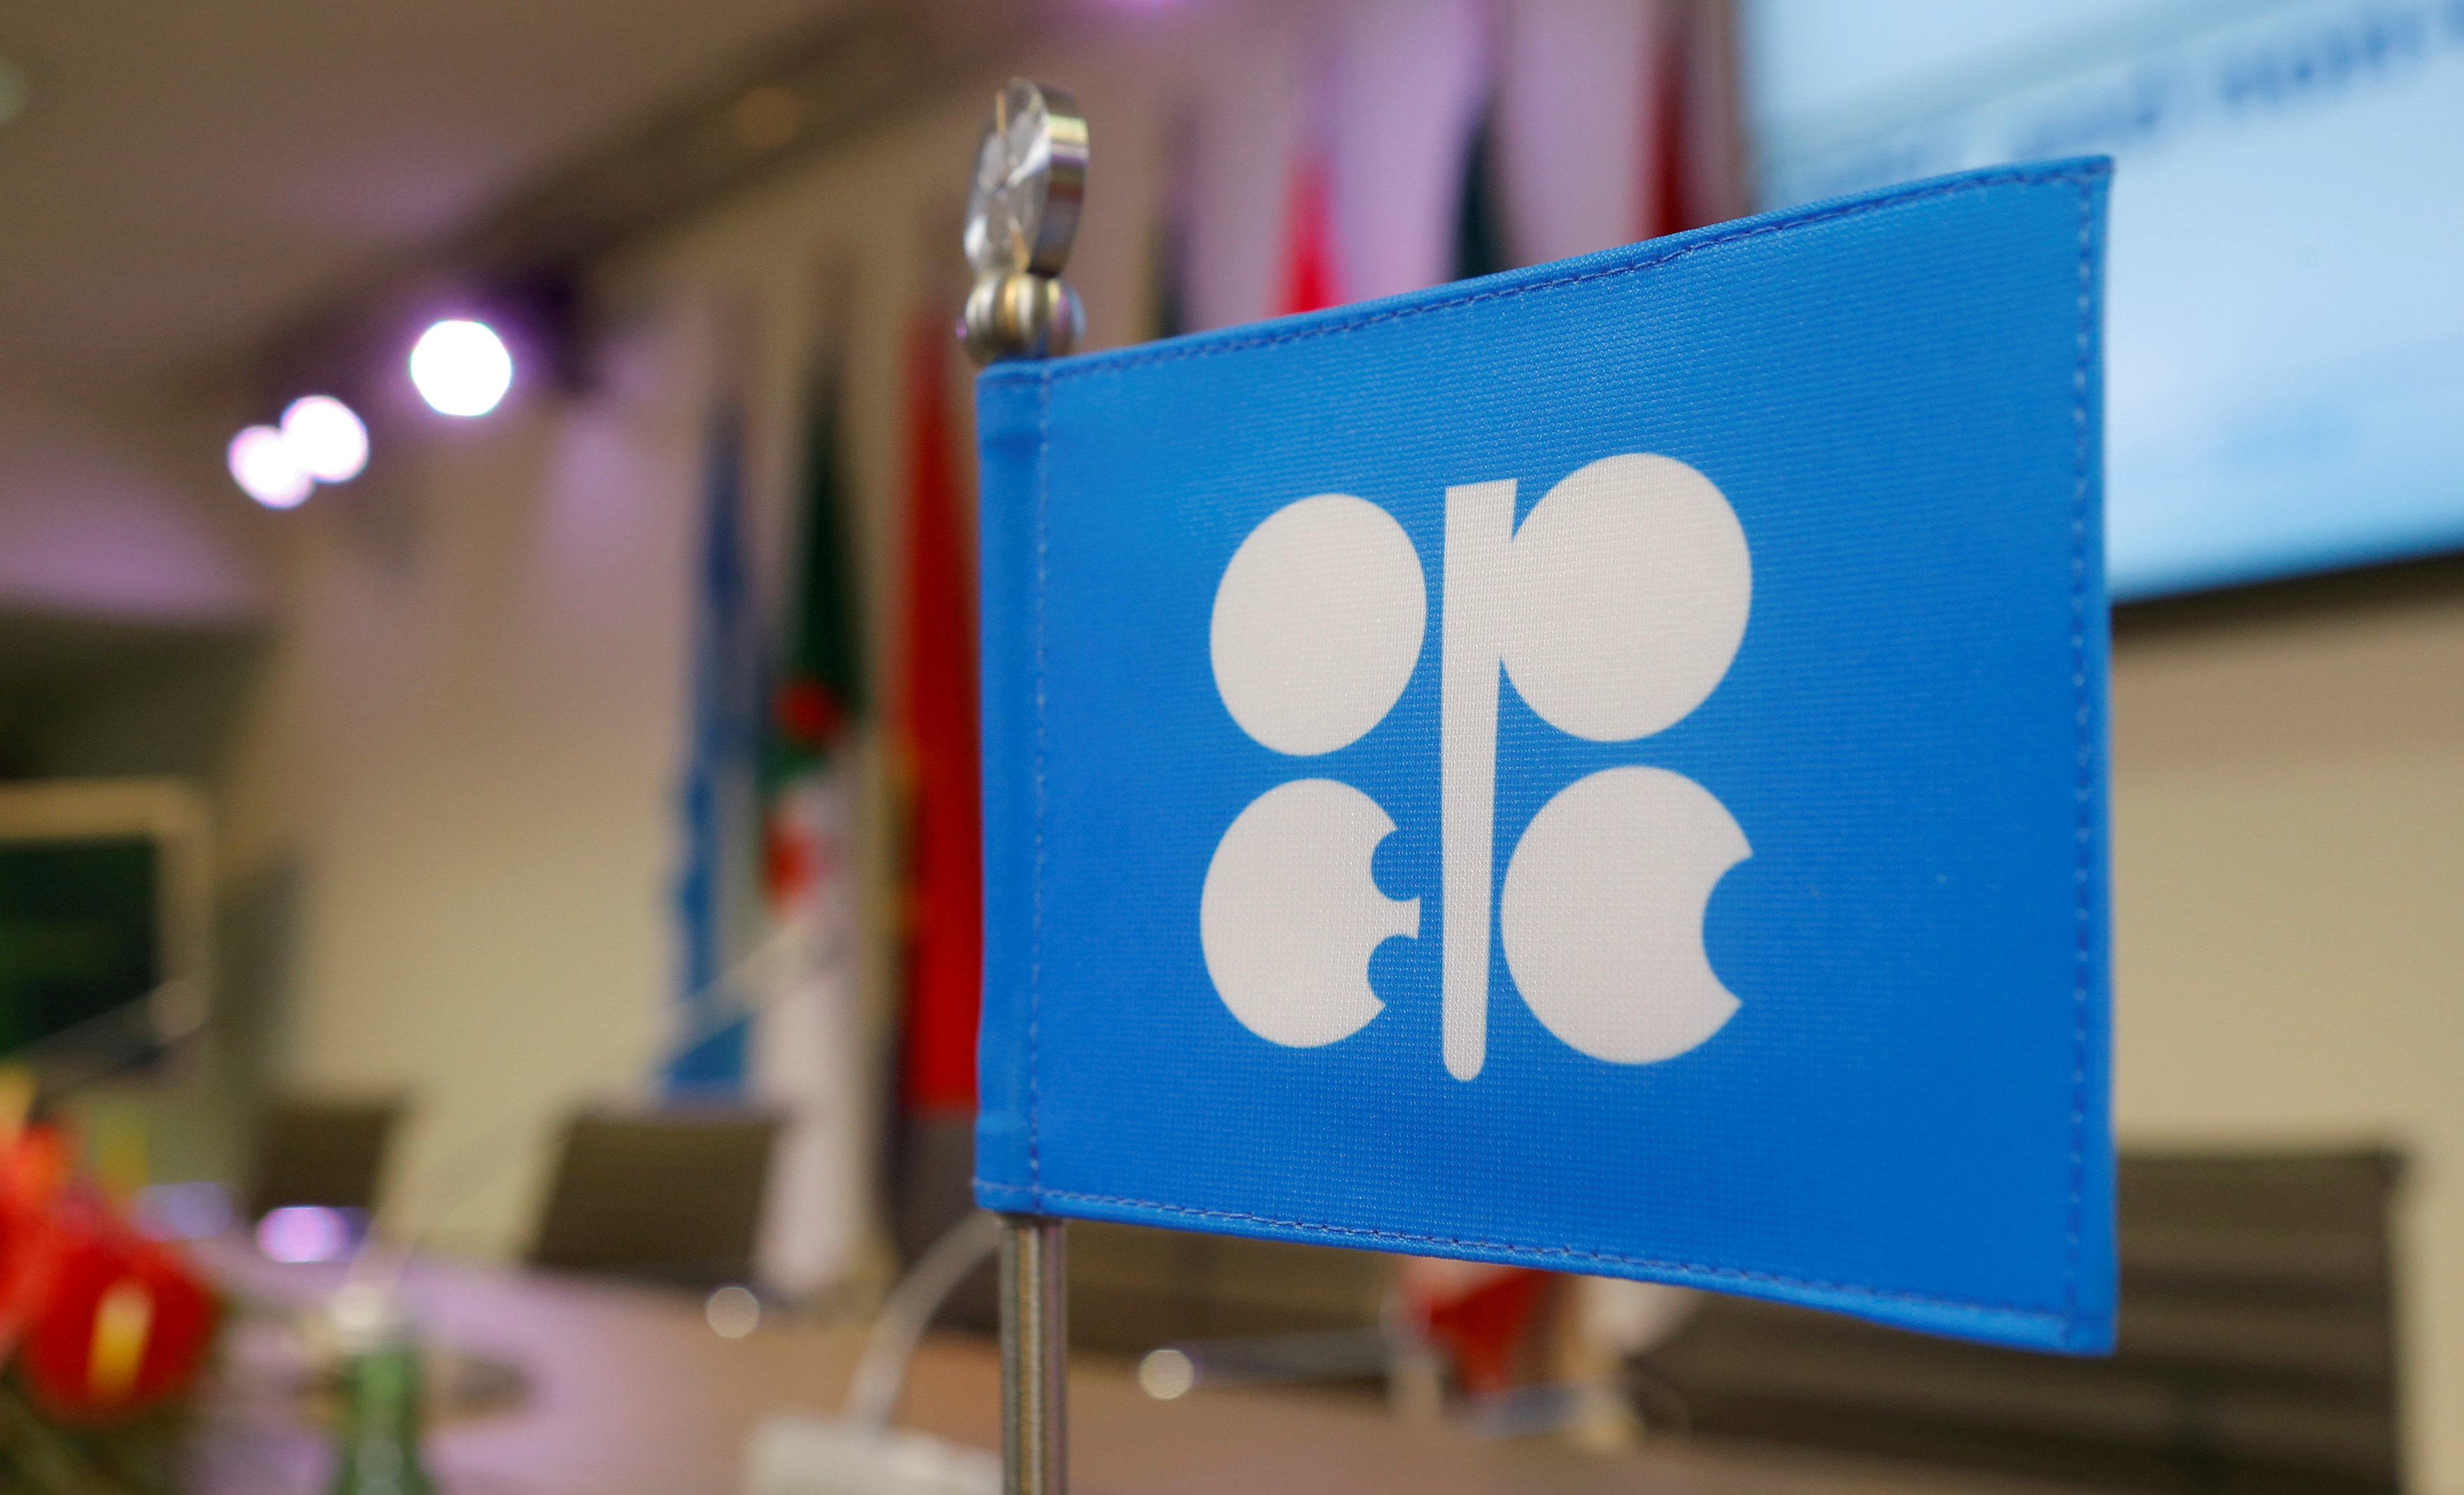 Opec gets closer to original target of oil cut pact